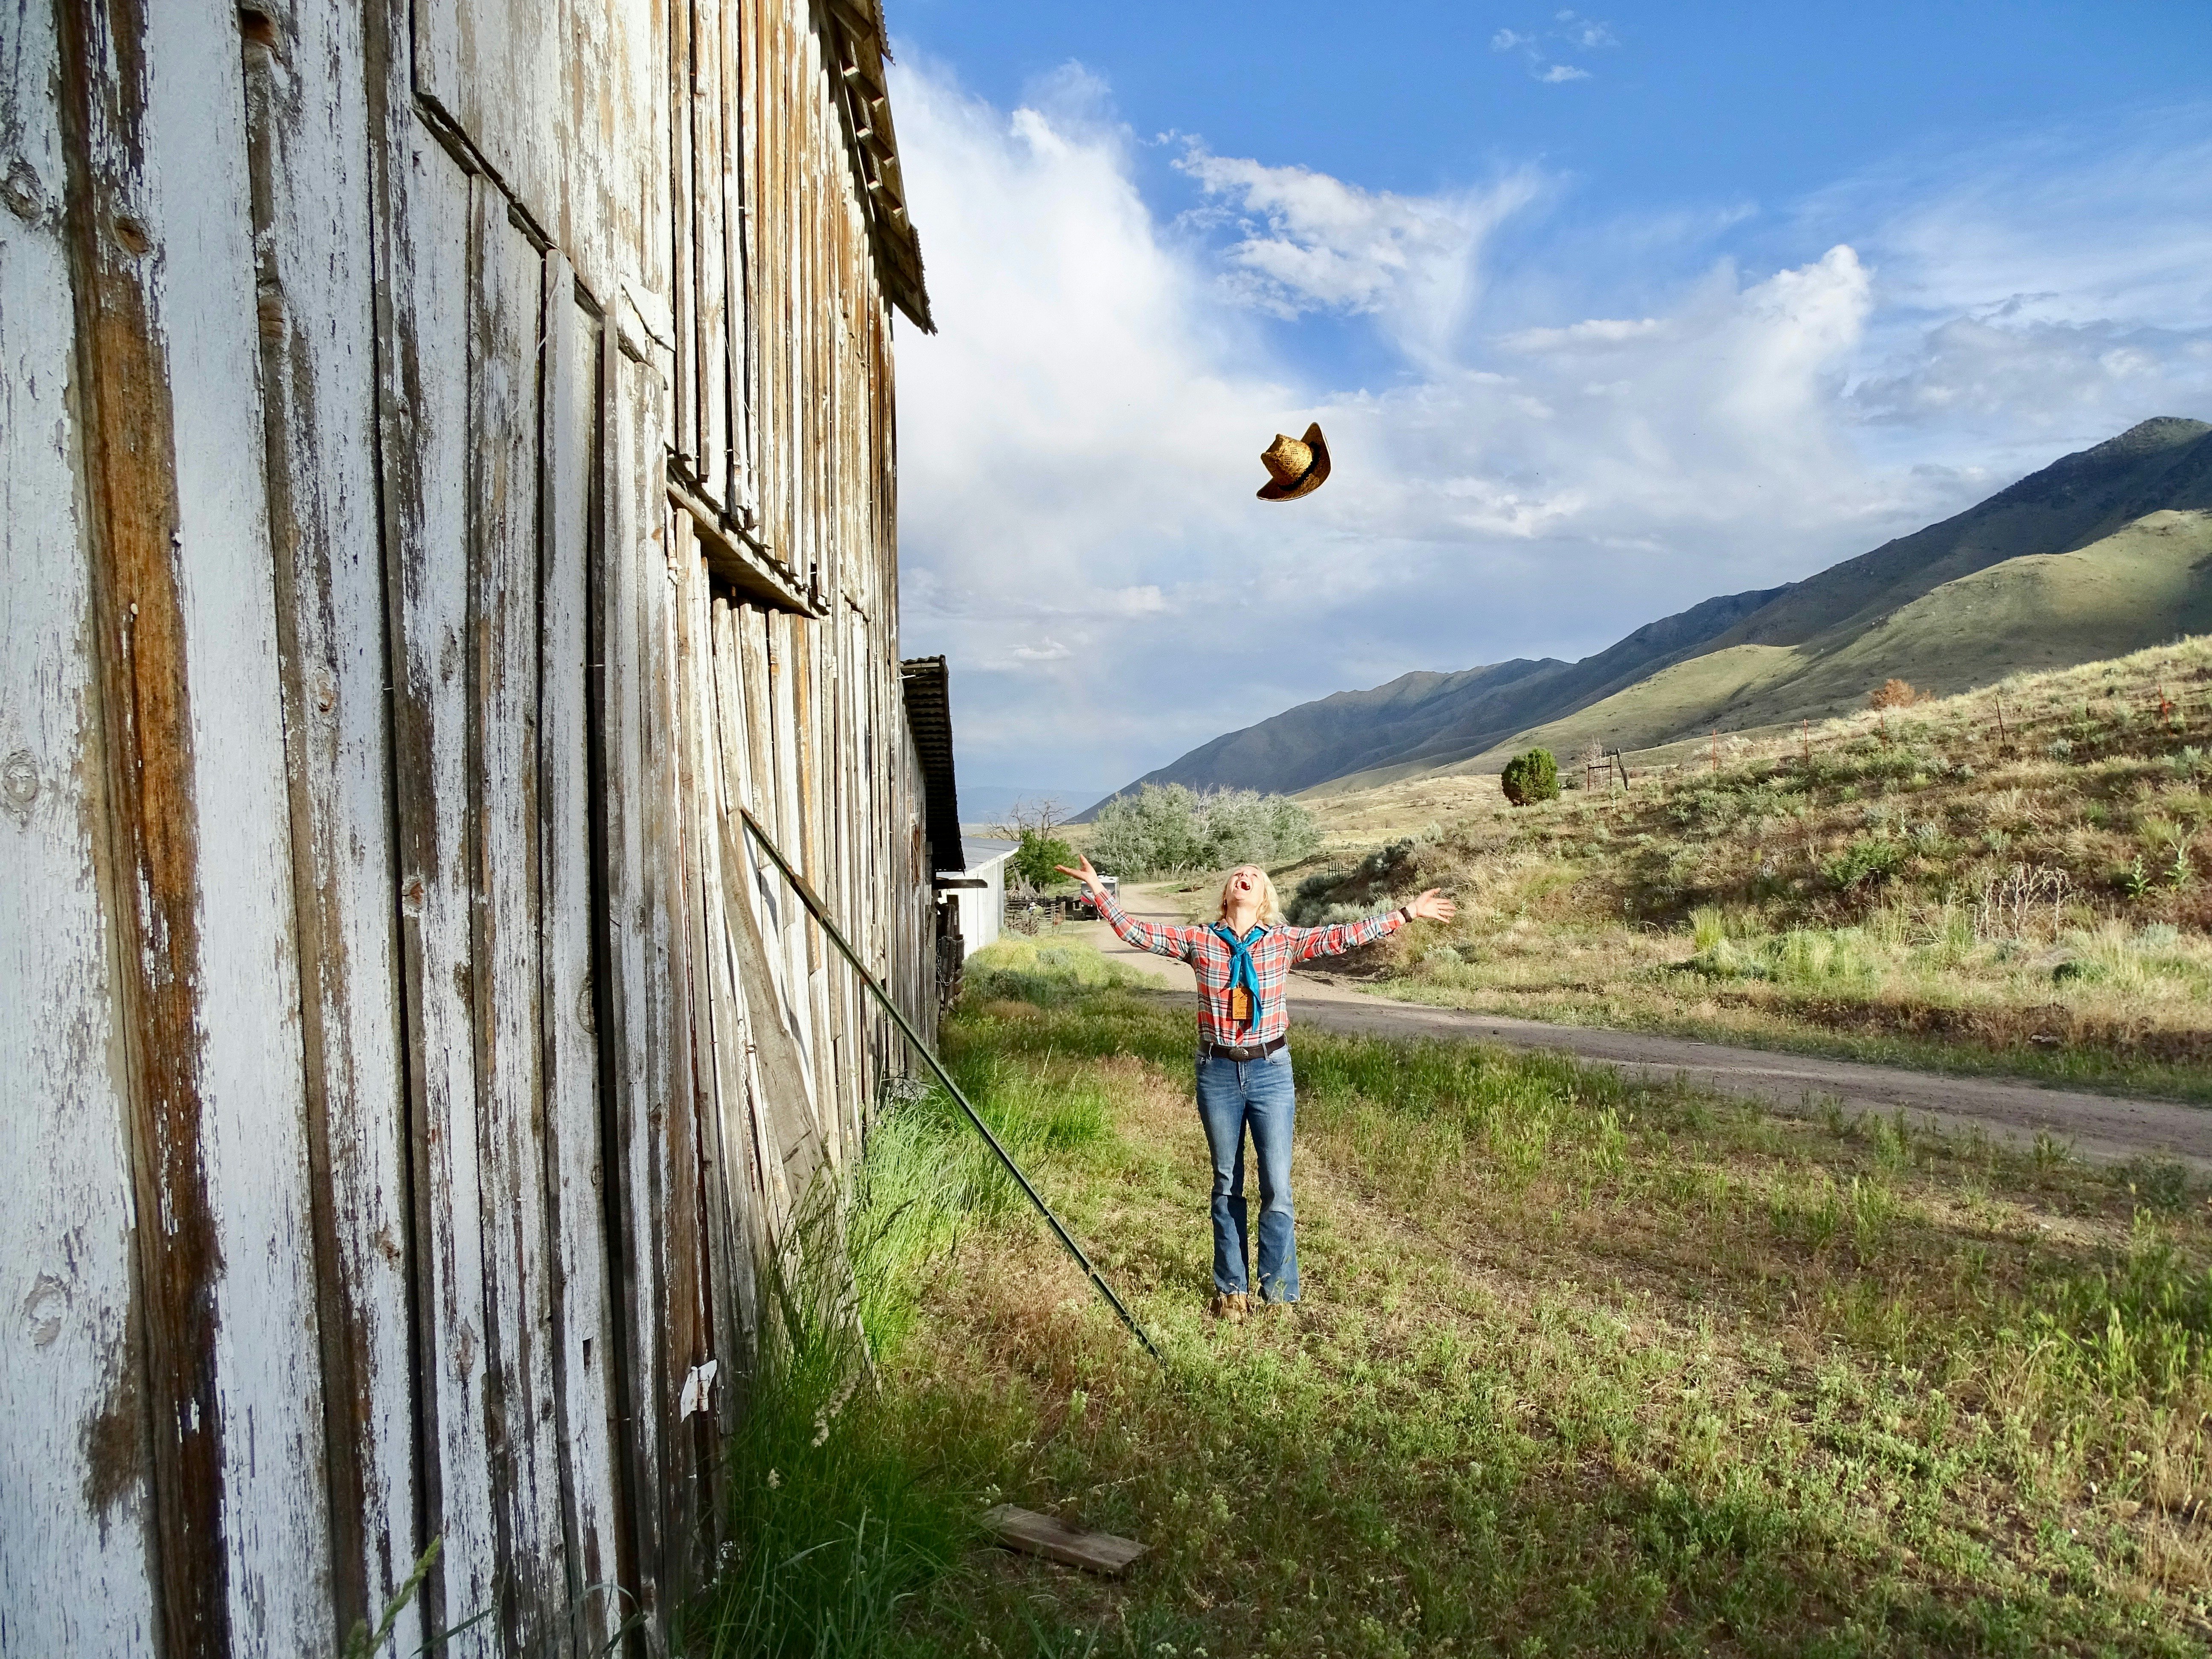 The author dressed in blue jeans and a plaid shirt, next to a faded barn wall